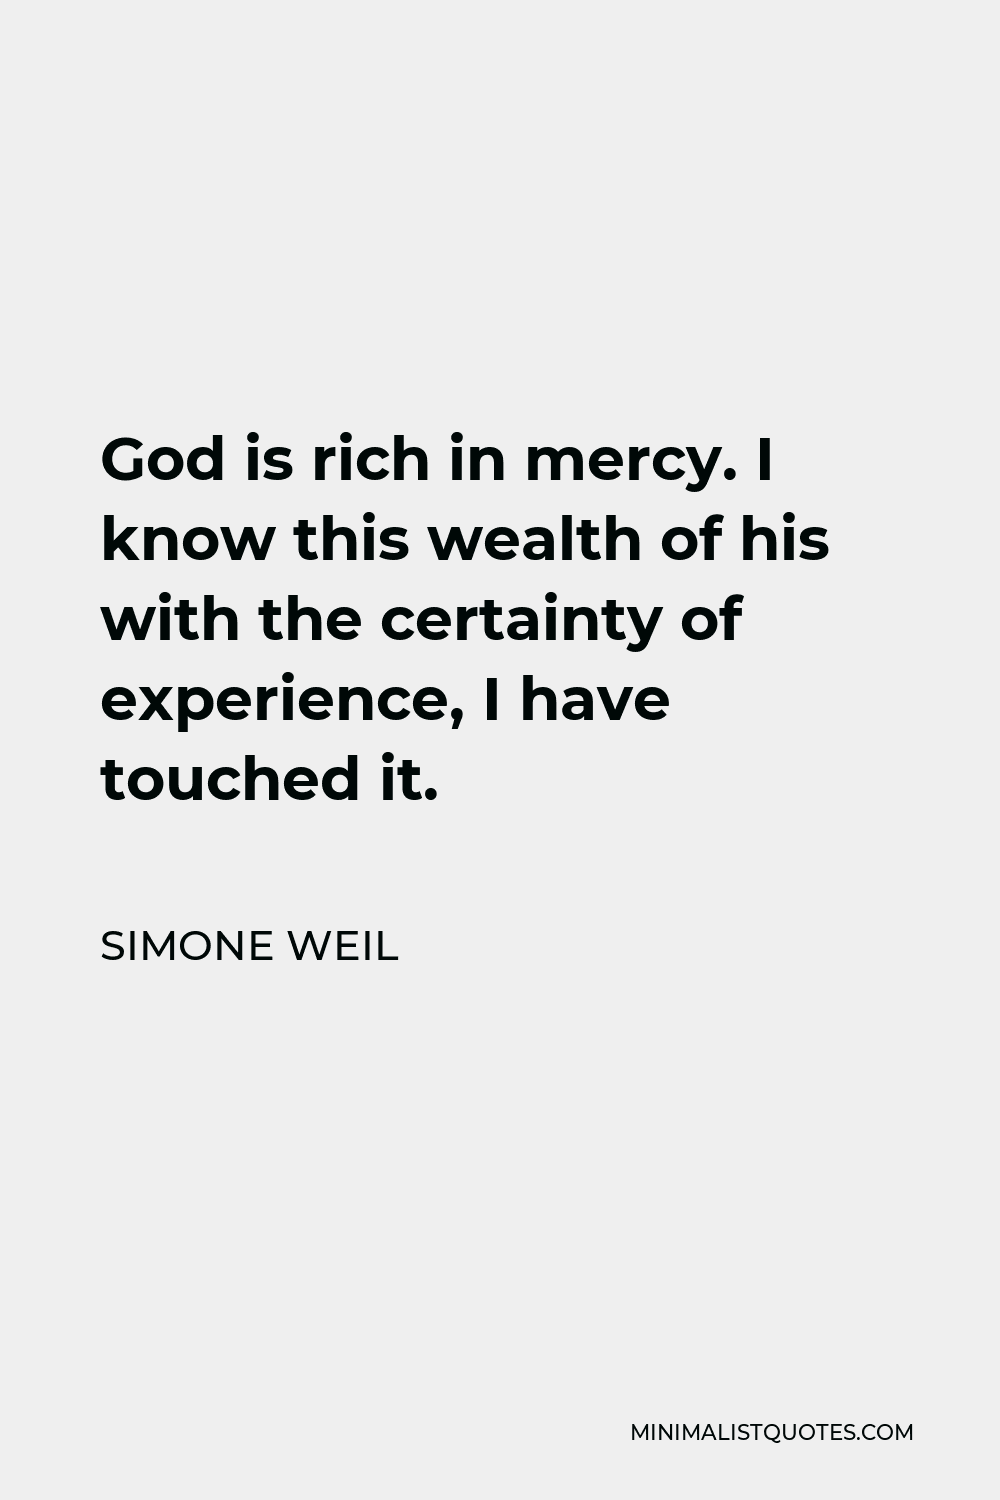 Simone Weil Quote - God is rich in mercy. I know this wealth of his with the certainty of experience, I have touched it.